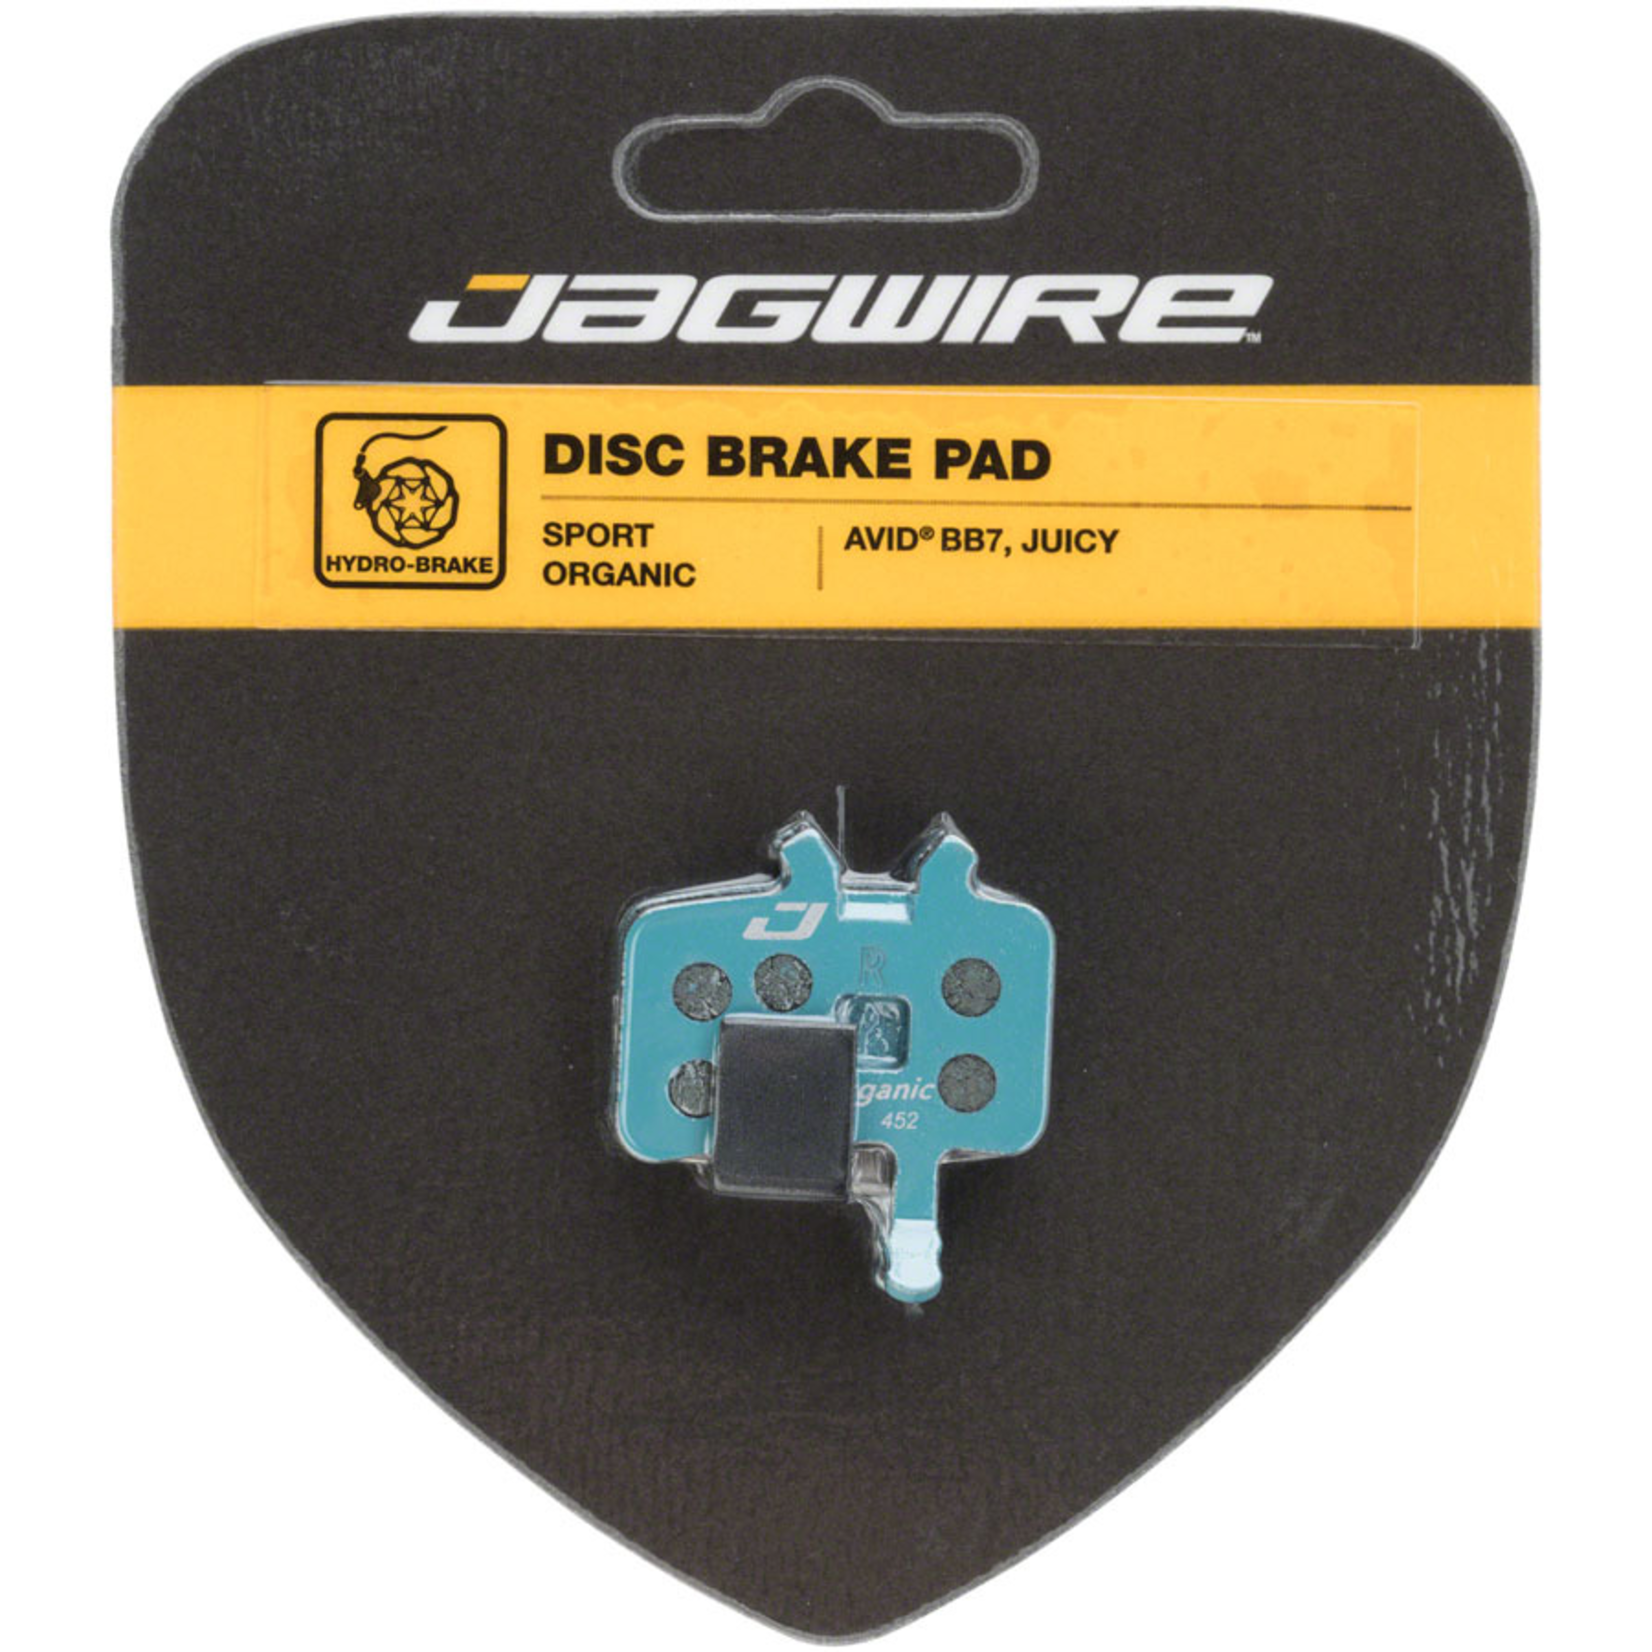 Jagwire Jagwire Sport Organic Disc Brake Pads - For Avid BB7 and Juicy